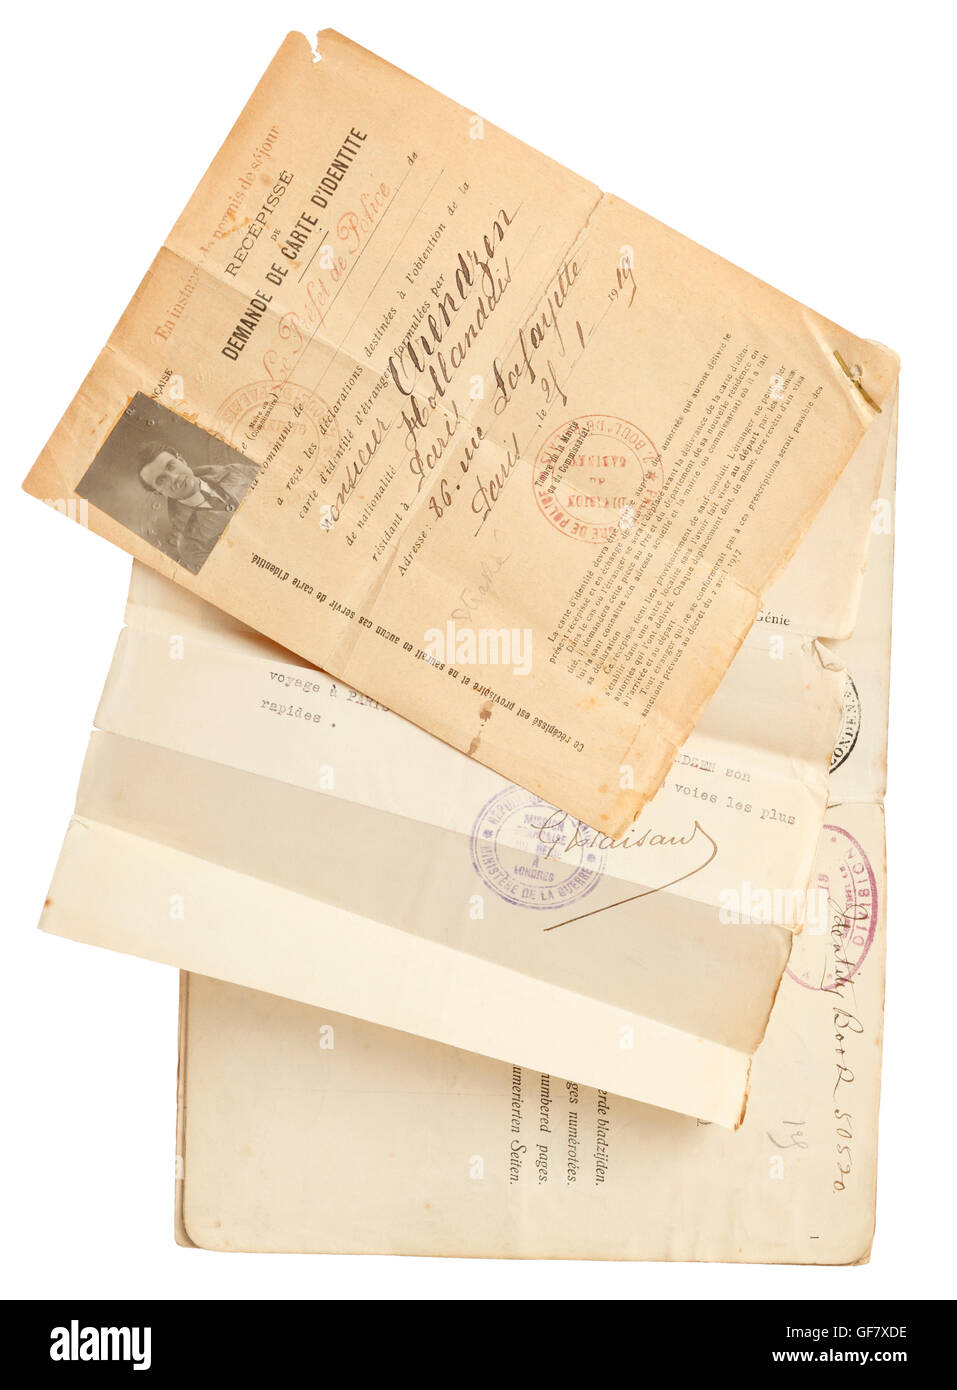 French Identity Card or Permis de Sejour, January 1919 Stock Photo